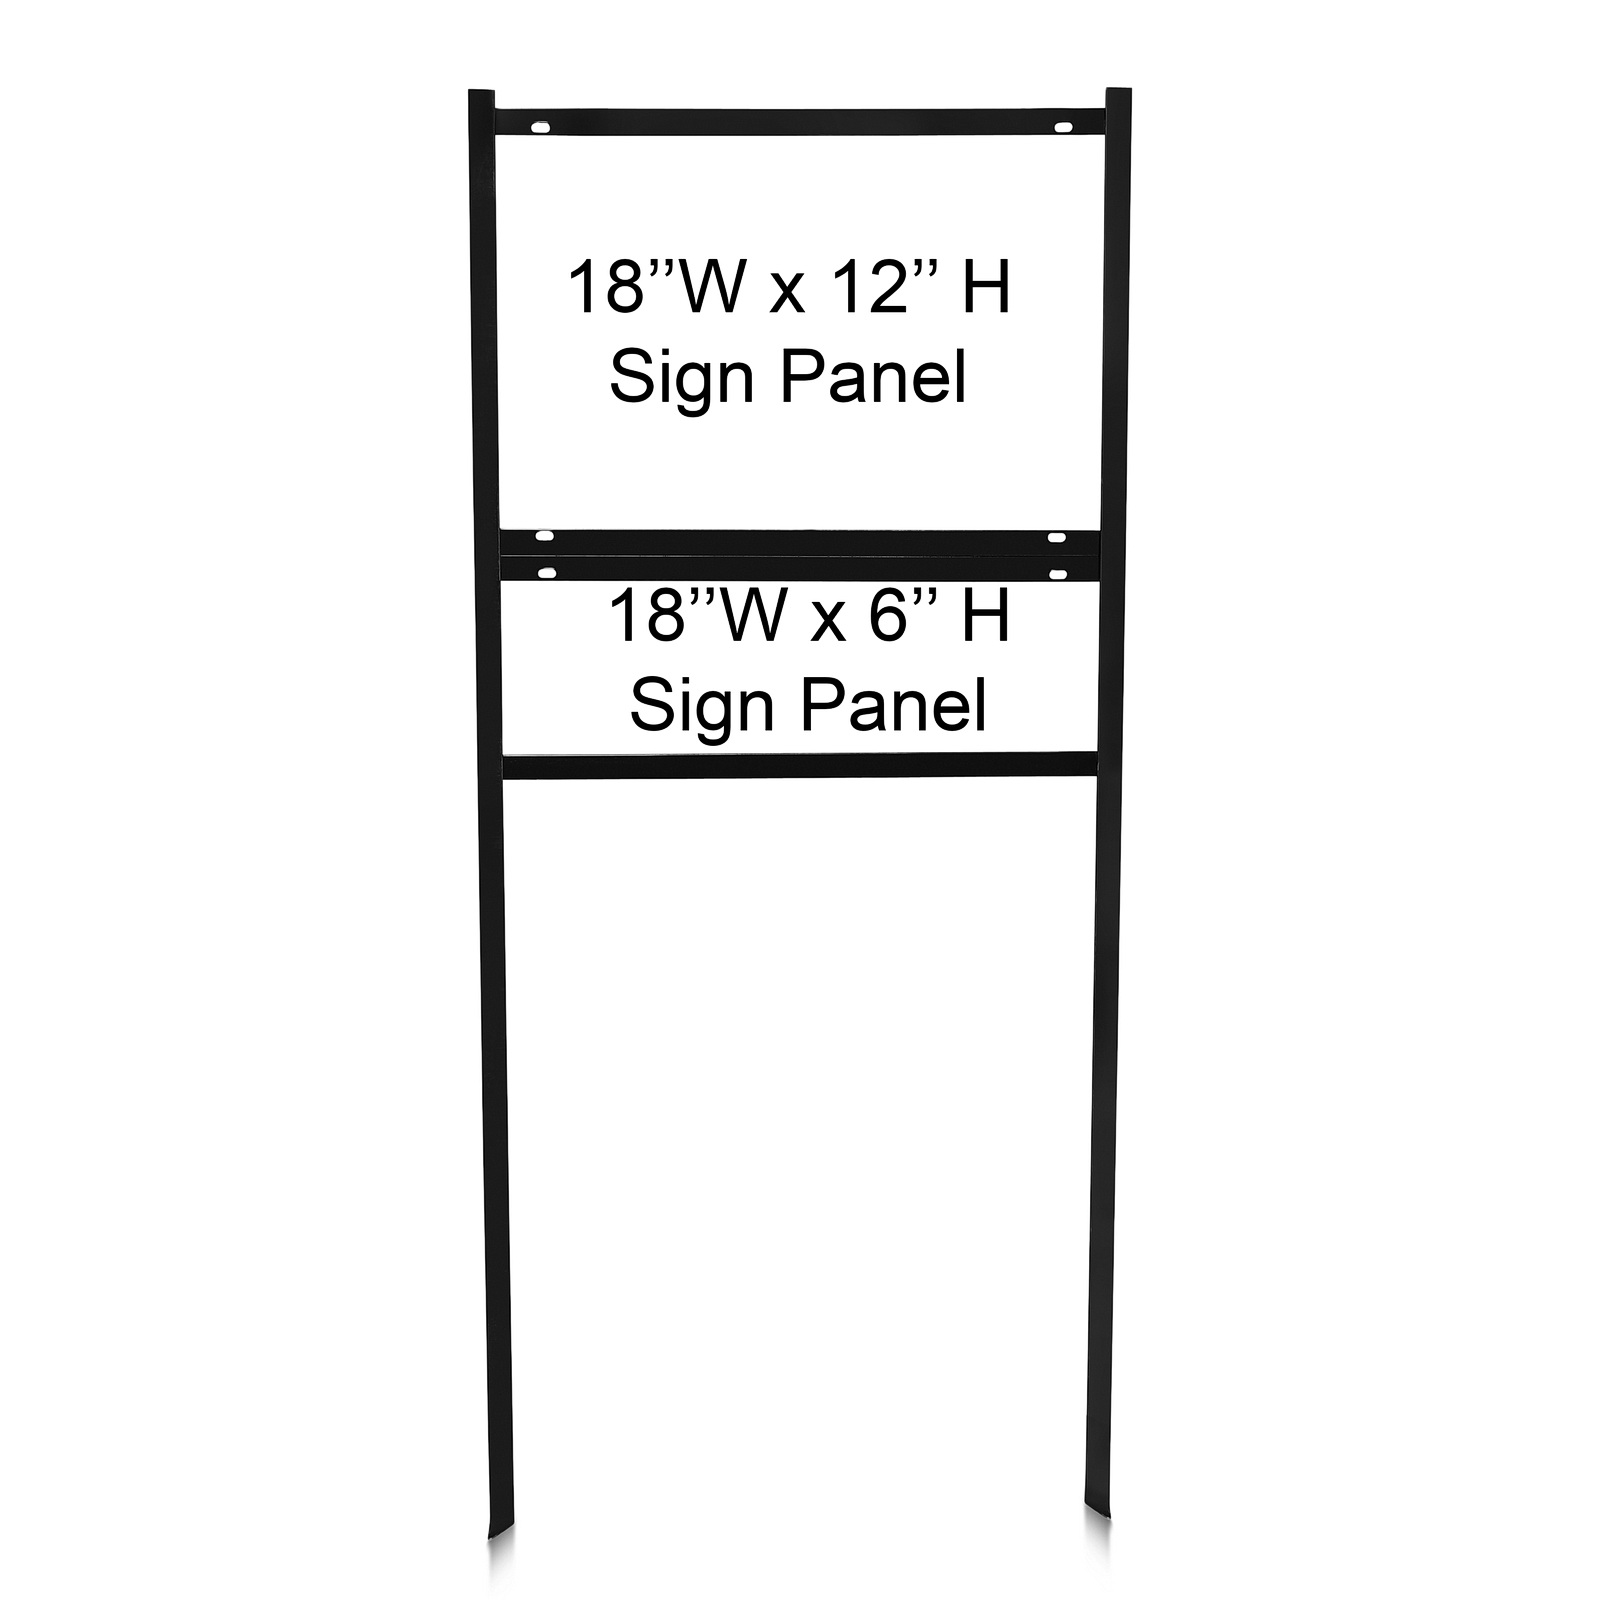 18'' Wide x 12'' Tall Black Single Rider Slide-in/Bolt-in Real Estate Sign Panel Frame (accepts up to 1/8'' thickness)